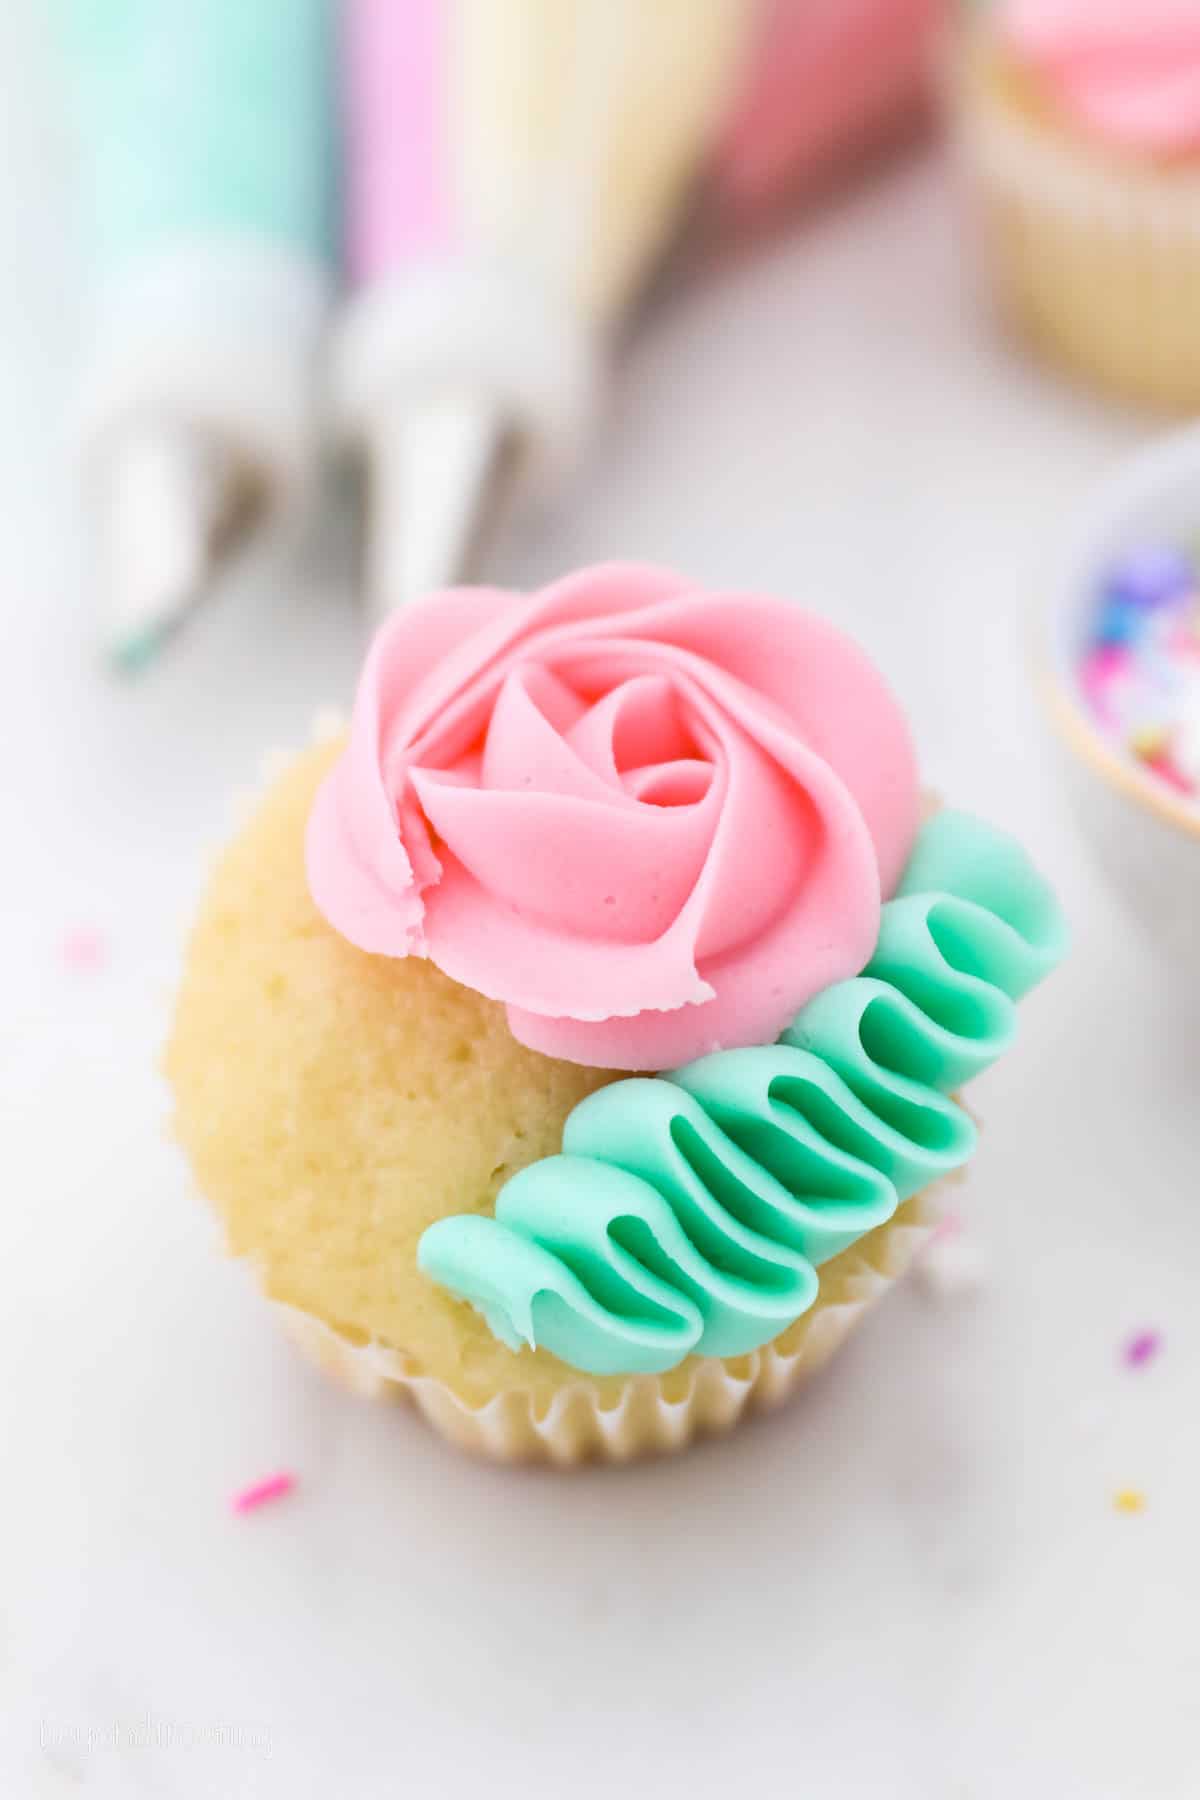 A vanilla cupcake topped with a pink buttercream rose and a teal frosting squiggle.